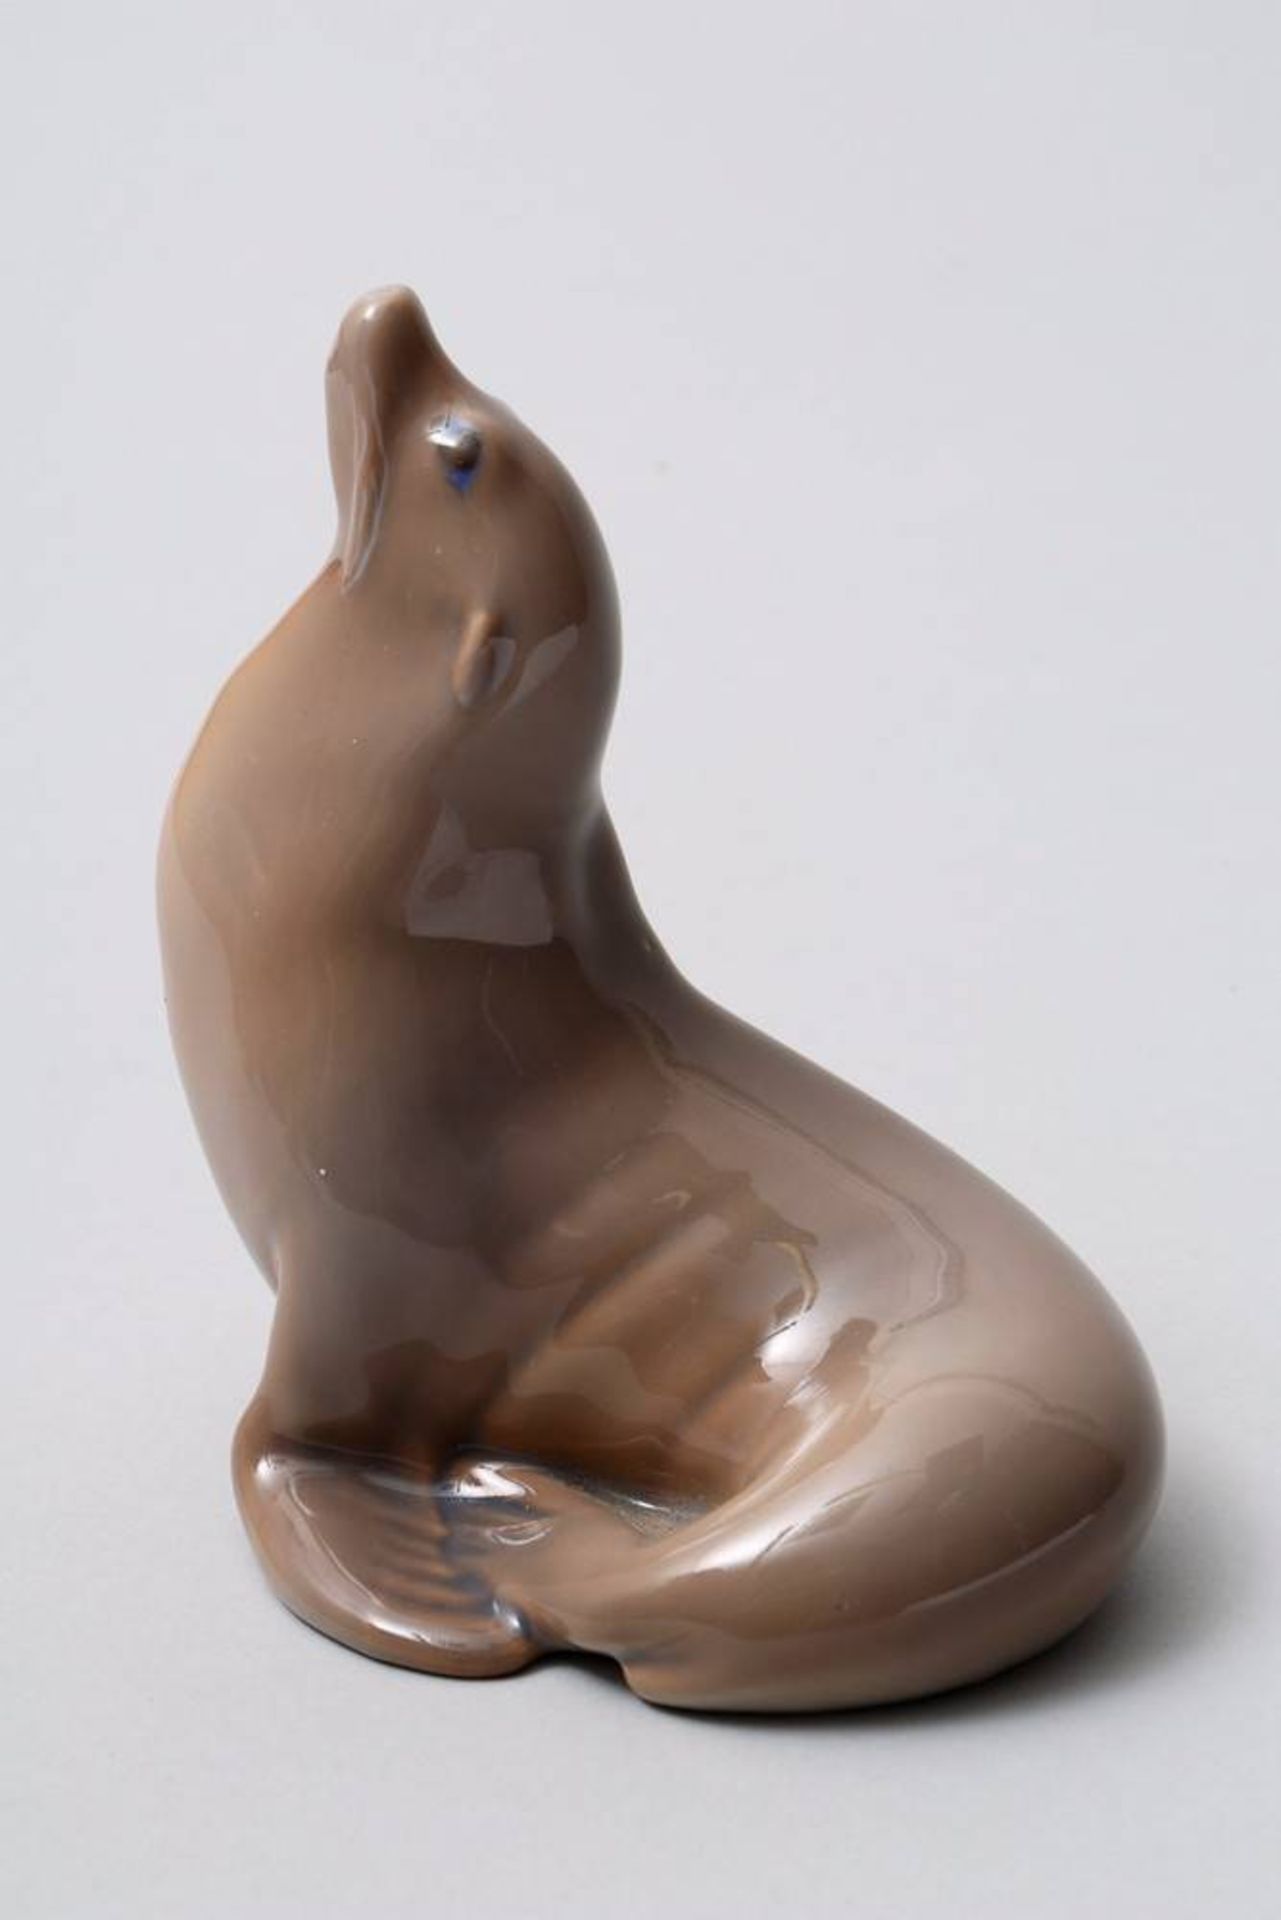 Sealion Royal Copenhagen, Denmark, 20th C., porcelain, painted in colours, makers mark and model No.